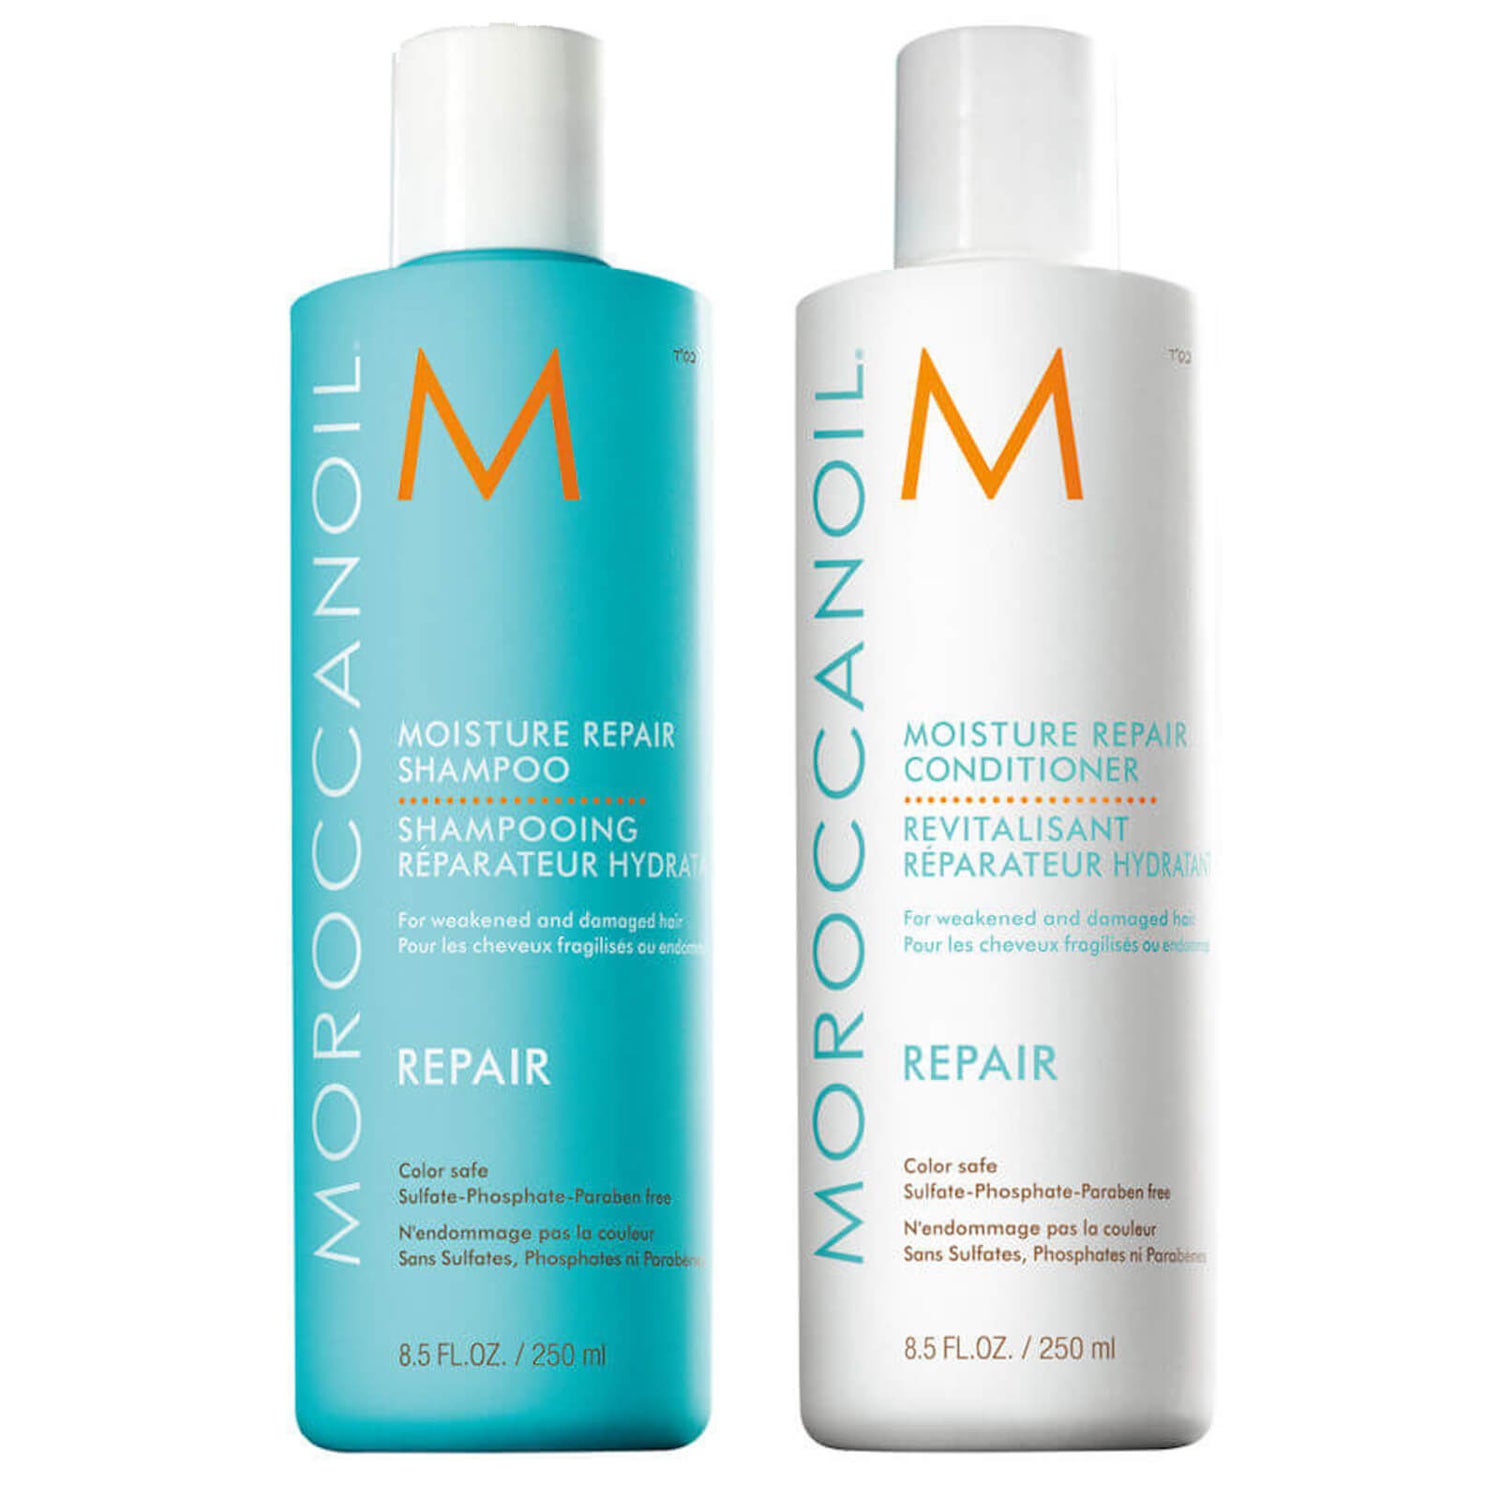 Moroccanoil Moisture Repair Shampoo and Conditioner | Buy Online At RY